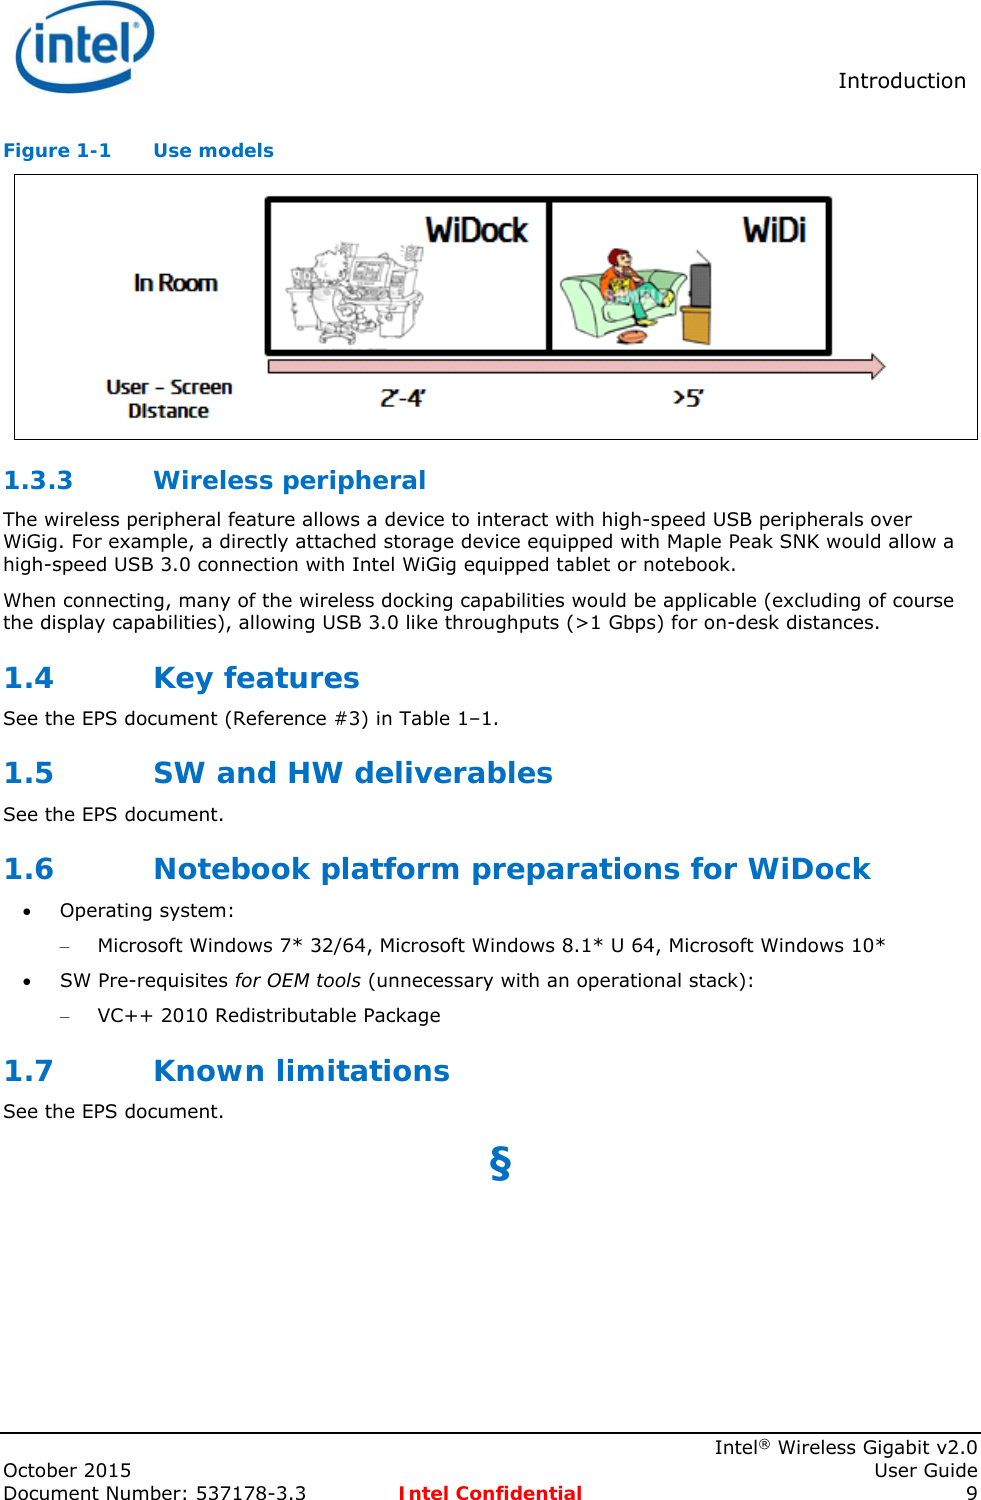  Introduction    Intel® Wireless Gigabit v2.0 October 2015    User Guide Document Number: 537178-3.3  Intel Confidential 9 Figure 1-1  Use models  1.3.3 Wireless peripheral The wireless peripheral feature allows a device to interact with high-speed USB peripherals over WiGig. For example, a directly attached storage device equipped with Maple Peak SNK would allow a high-speed USB 3.0 connection with Intel WiGig equipped tablet or notebook. When connecting, many of the wireless docking capabilities would be applicable (excluding of course the display capabilities), allowing USB 3.0 like throughputs (&gt;1 Gbps) for on-desk distances. 1.4 Key features See the EPS document (Reference #3) in Table 1–1. 1.5 SW and HW deliverables See the EPS document. 1.6 Notebook platform preparations for WiDock  Operating system: – Microsoft Windows 7* 32/64, Microsoft Windows 8.1* U 64, Microsoft Windows 10*   SW Pre-requisites for OEM tools (unnecessary with an operational stack): – VC++ 2010 Redistributable Package 1.7 Known limitations See the EPS document. §  